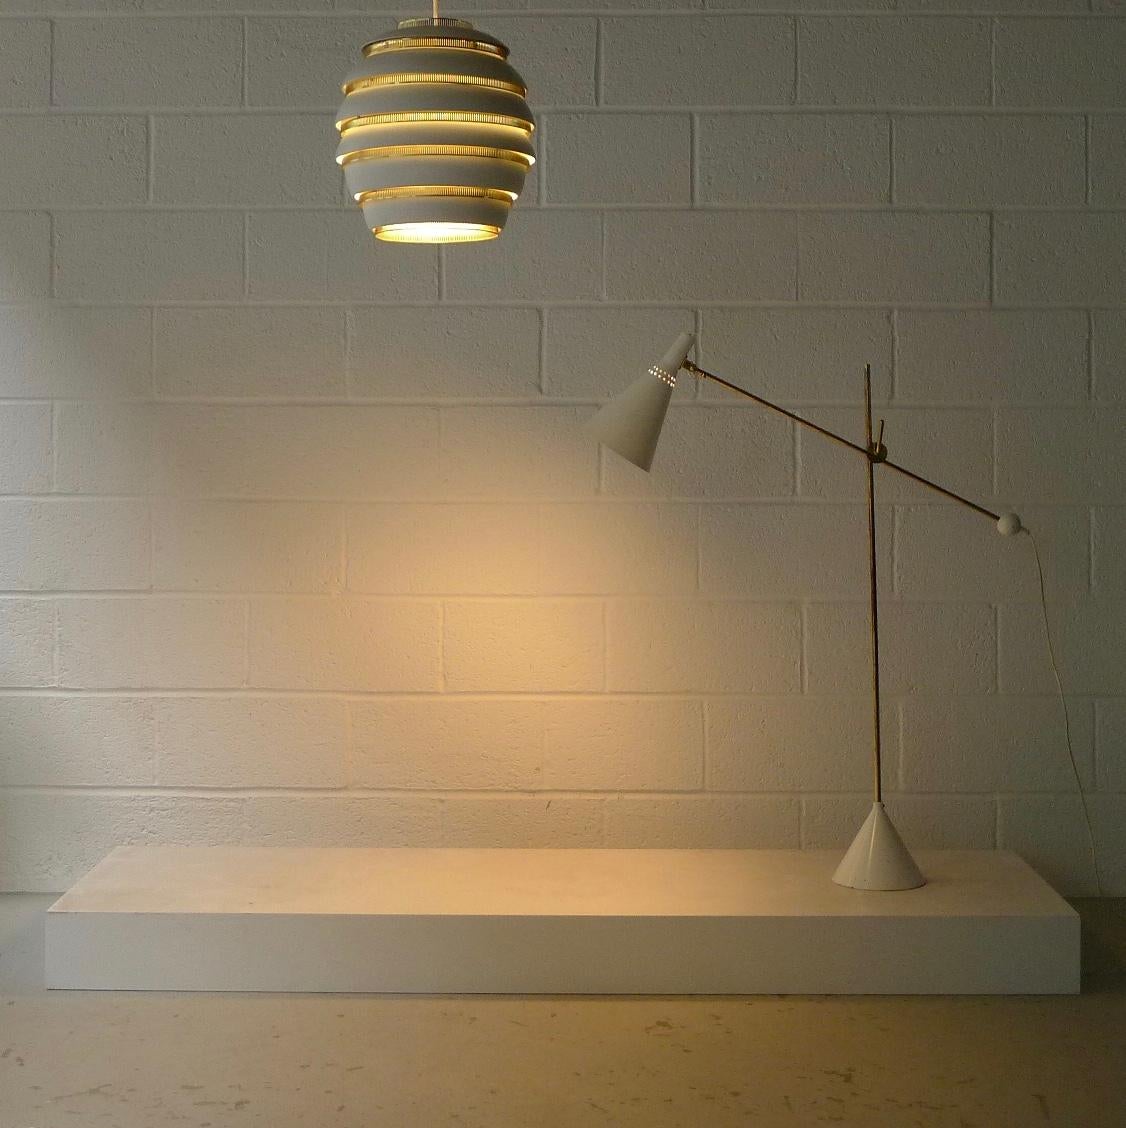 Tapio Wirkkala for Idman Oy, Finland, 1958. A model K-10 11 floor lamp, enamelled metal and brass. 

The lamp arm is adjustable in height and angle on the main stem and the shade pivots meaning this lamp has a multitude of possible